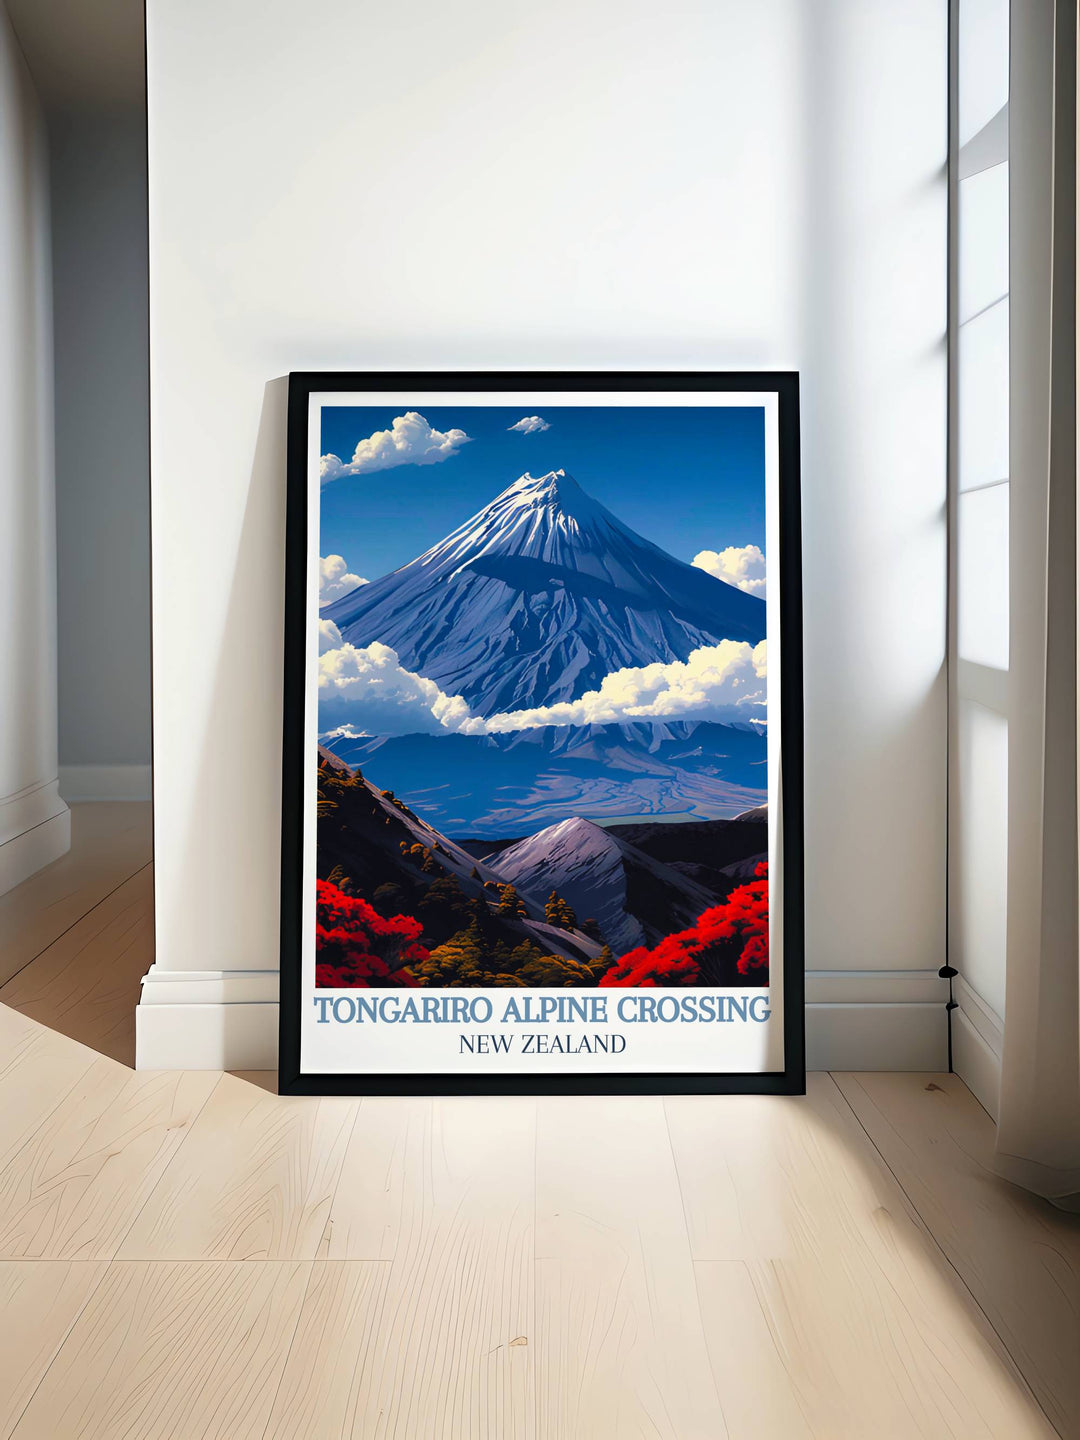 Tongariro Alpine Crossing gallery wall art capturing the stunning vistas of New Zealands iconic trail, featuring emerald lakes and rugged volcanic terrain, perfect for adding a touch of natural beauty to any room.